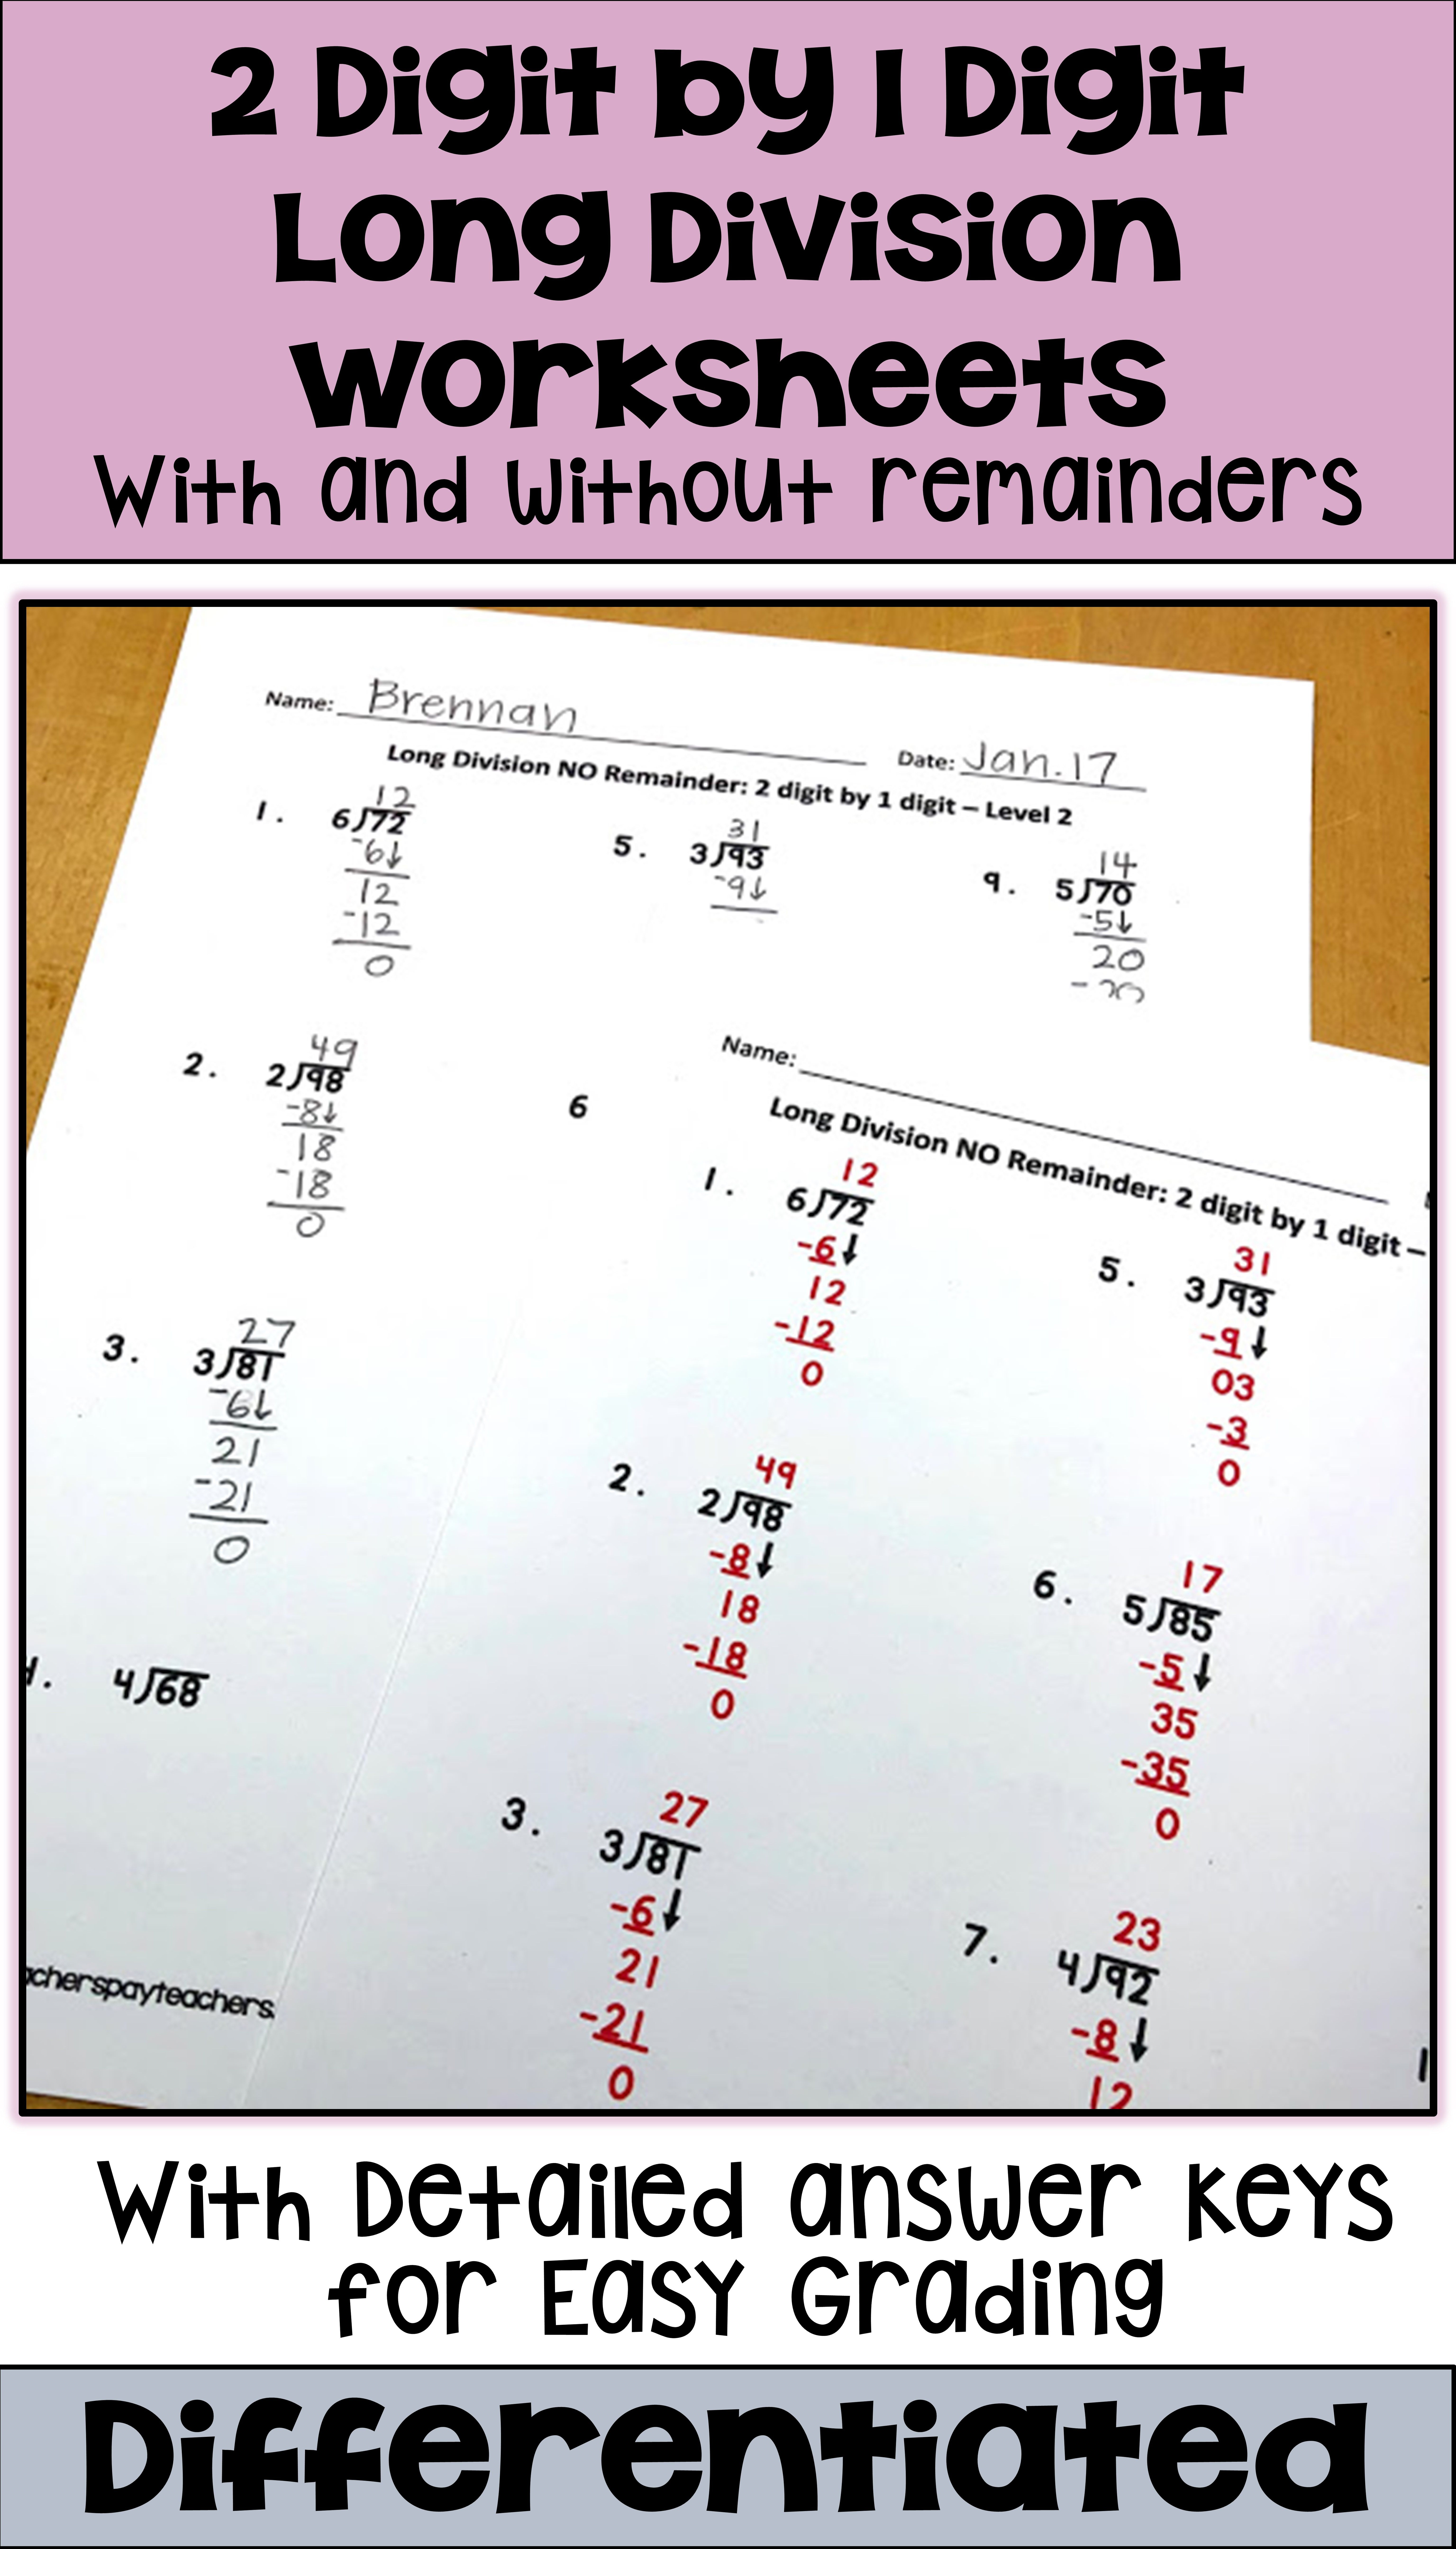 2 Digit By 1 Digit Long Division Worksheets For Morning Work Math